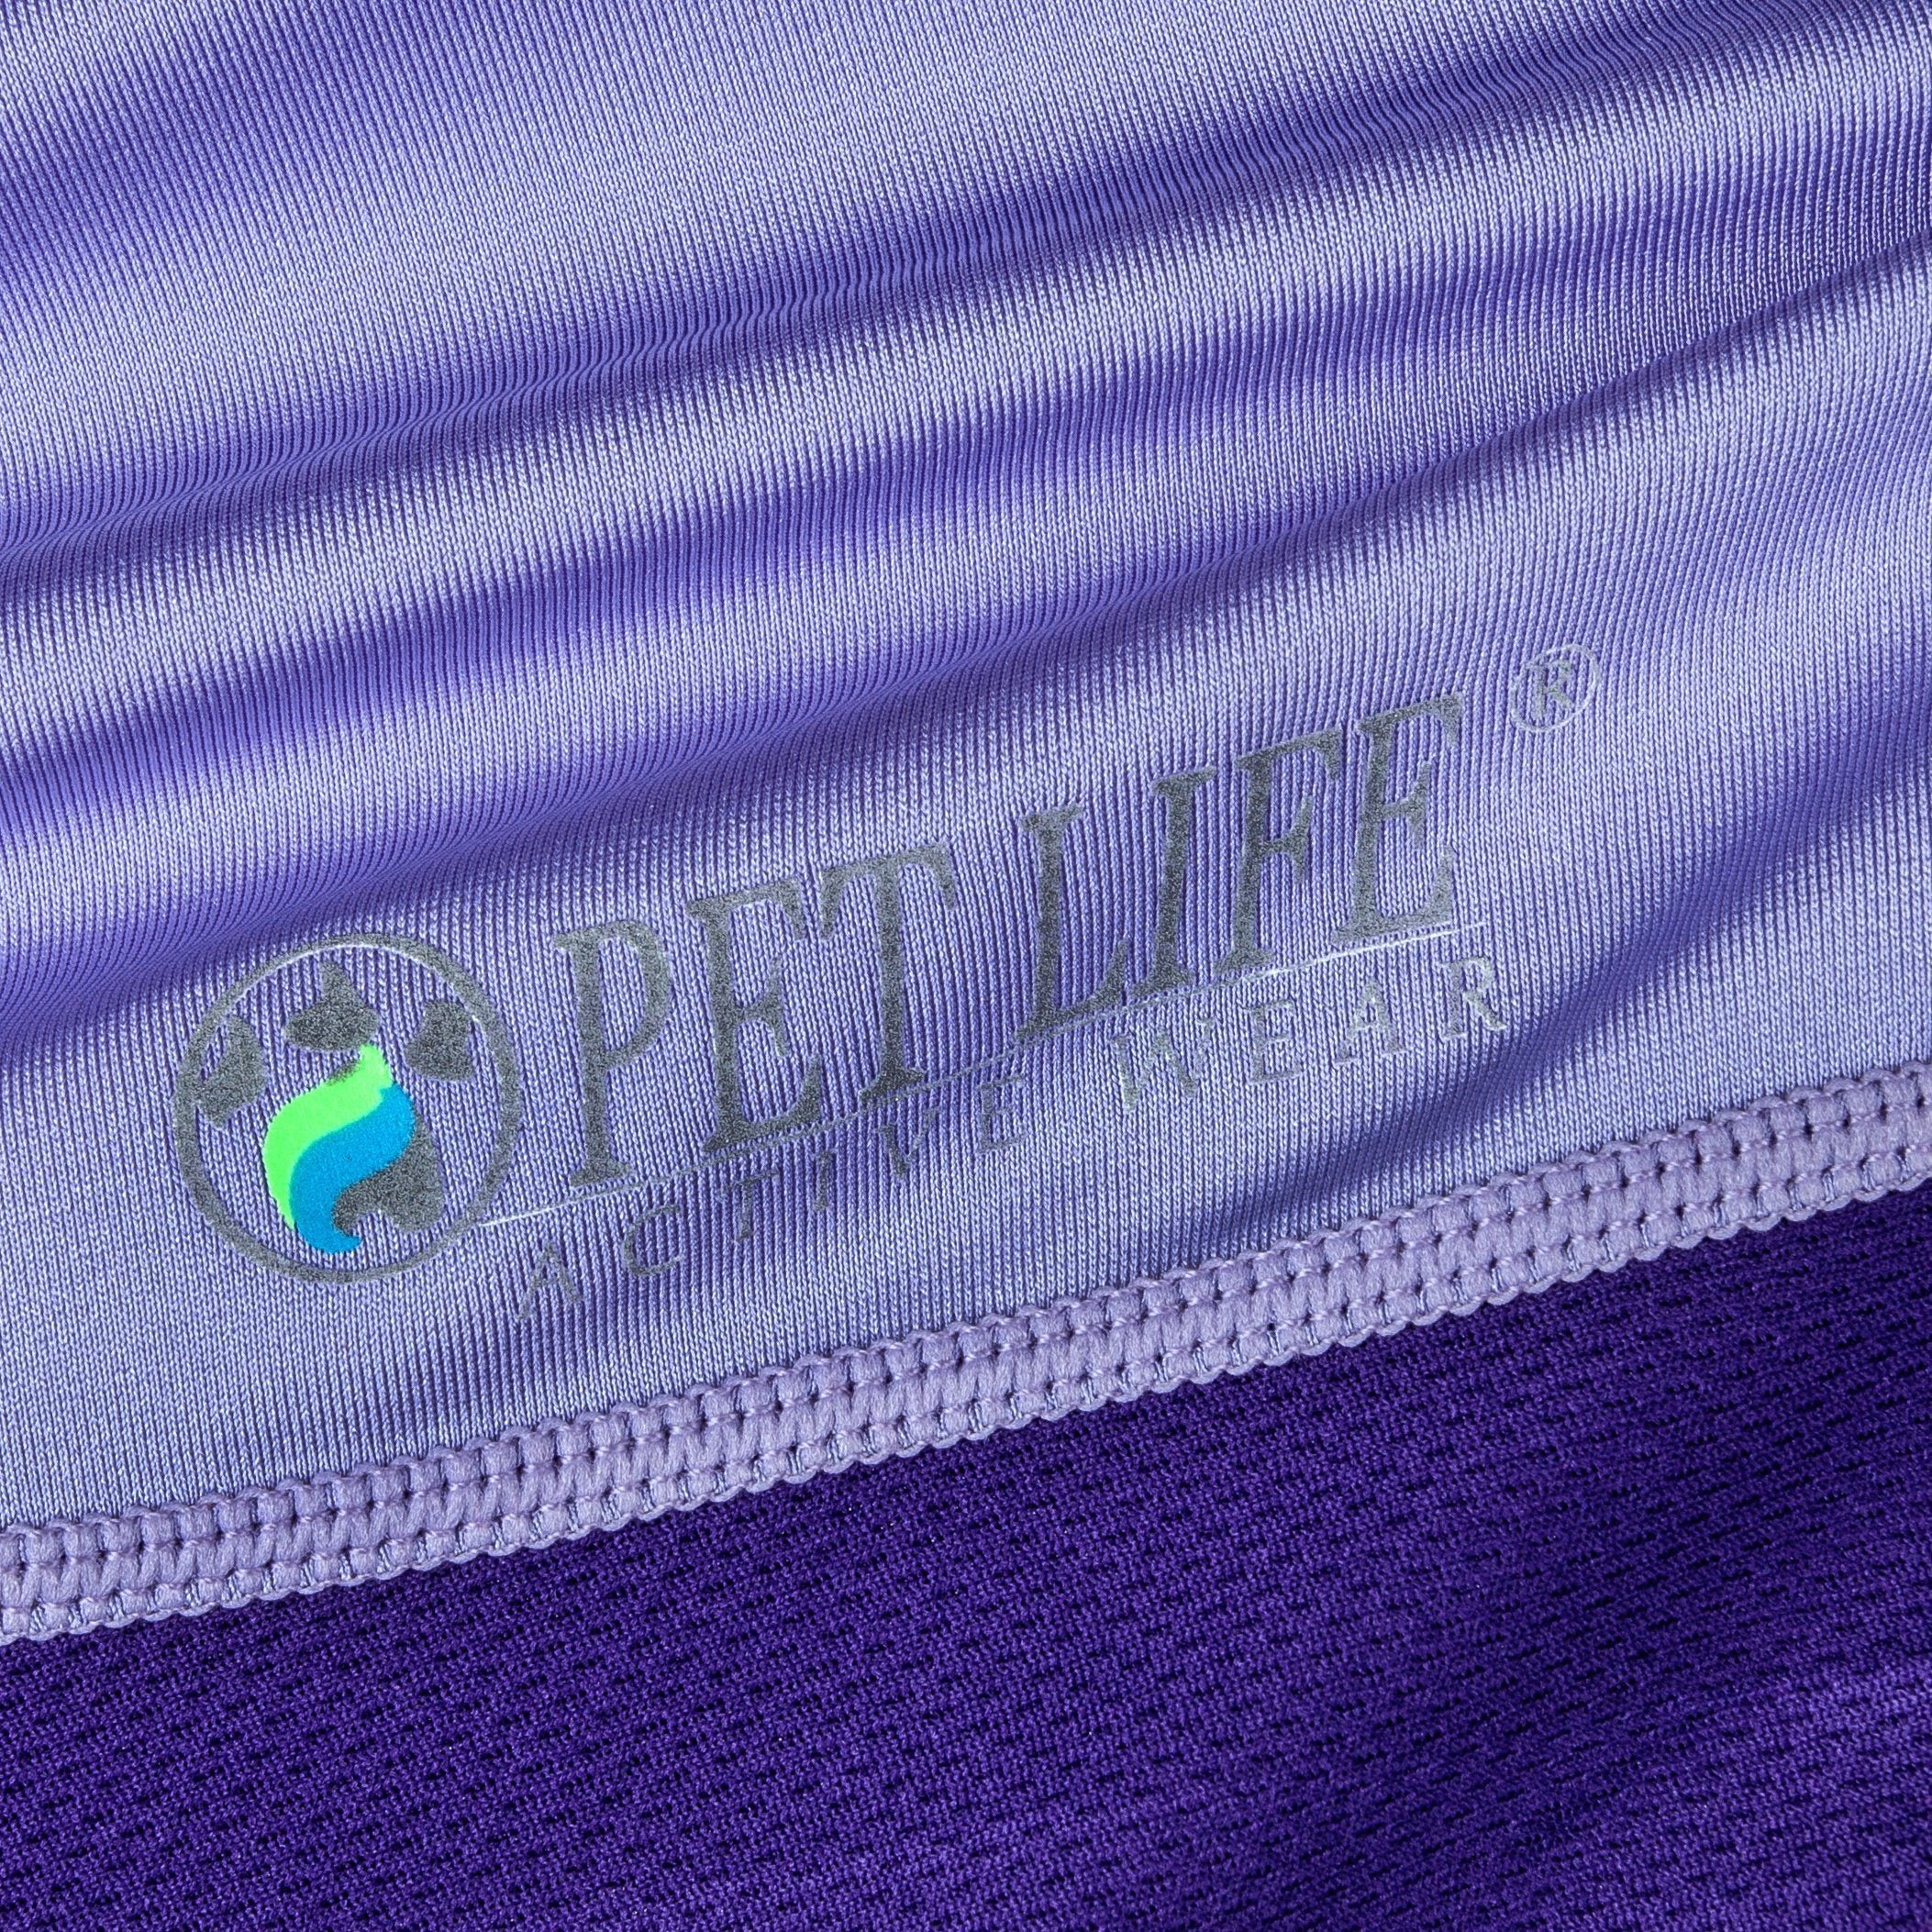 Pet Life ® Active 'Barko Pawlo' Relax-Stretch Quick-Drying Performance Dog Polo T-Shirt  